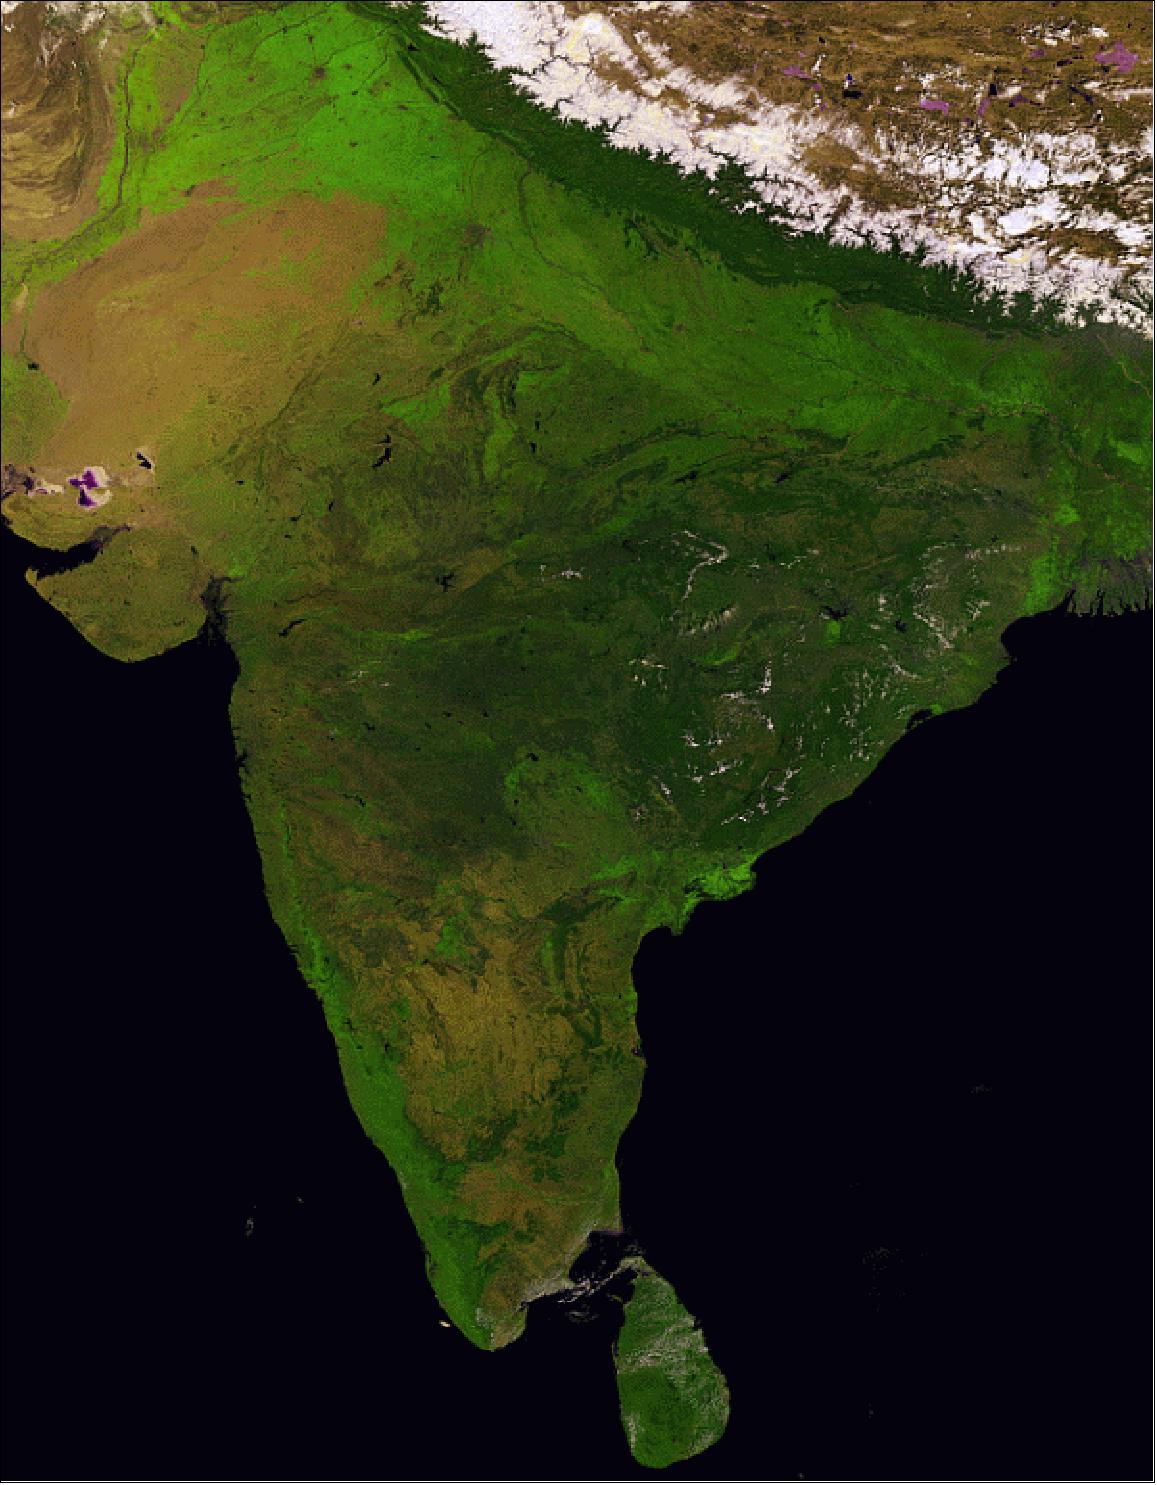 Figure 60: India - from Sri Lanka to the Himalayas, PROBA-V acquired this image on March 14, 2014, (image credit: ESA, VITO)